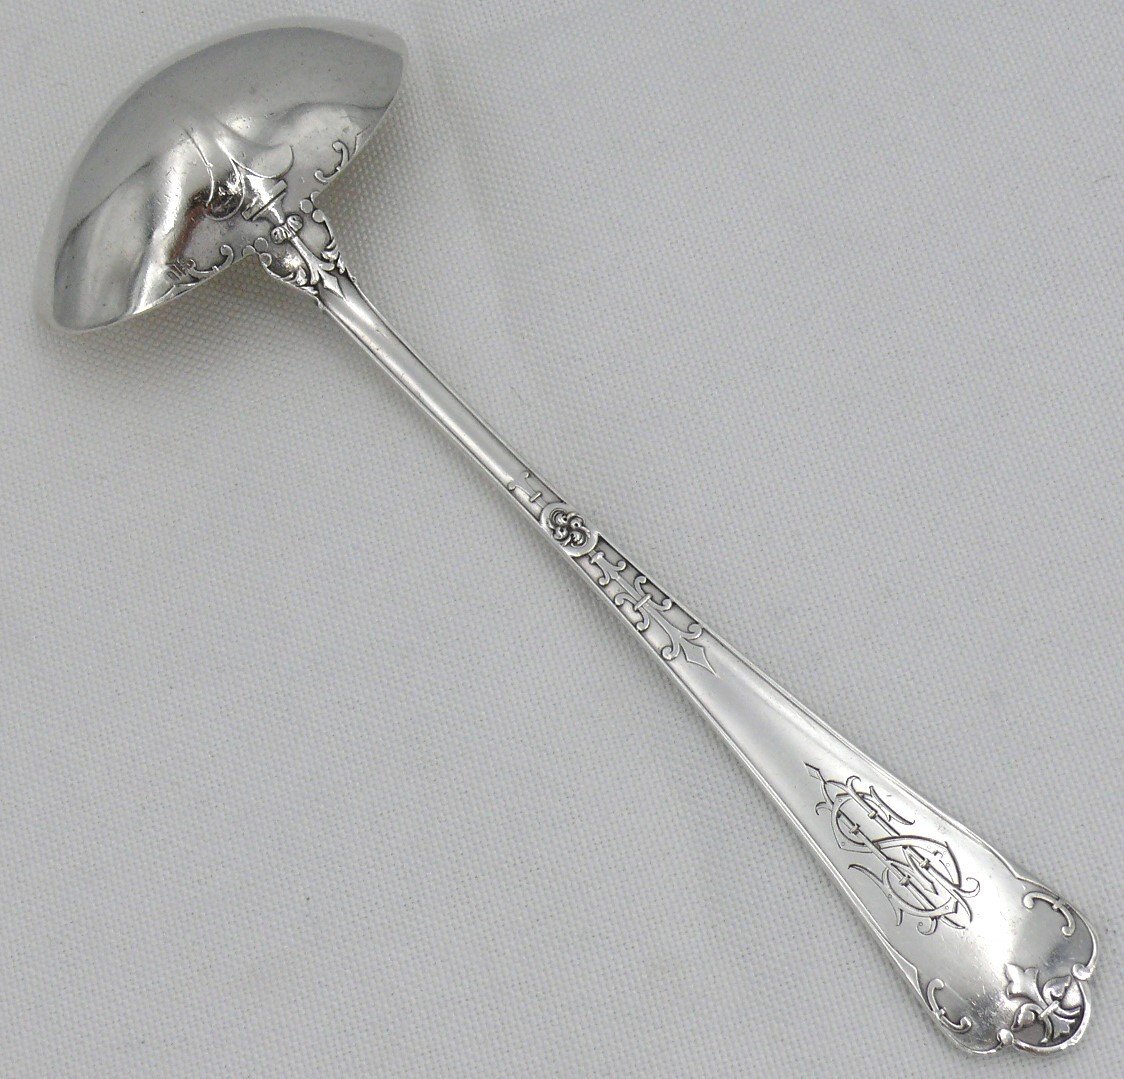 Puiforcat Fer De Lance Model With Rat Tail, Sauce Spoon/sauce Boat In Sterling Silver Minerva.-photo-3